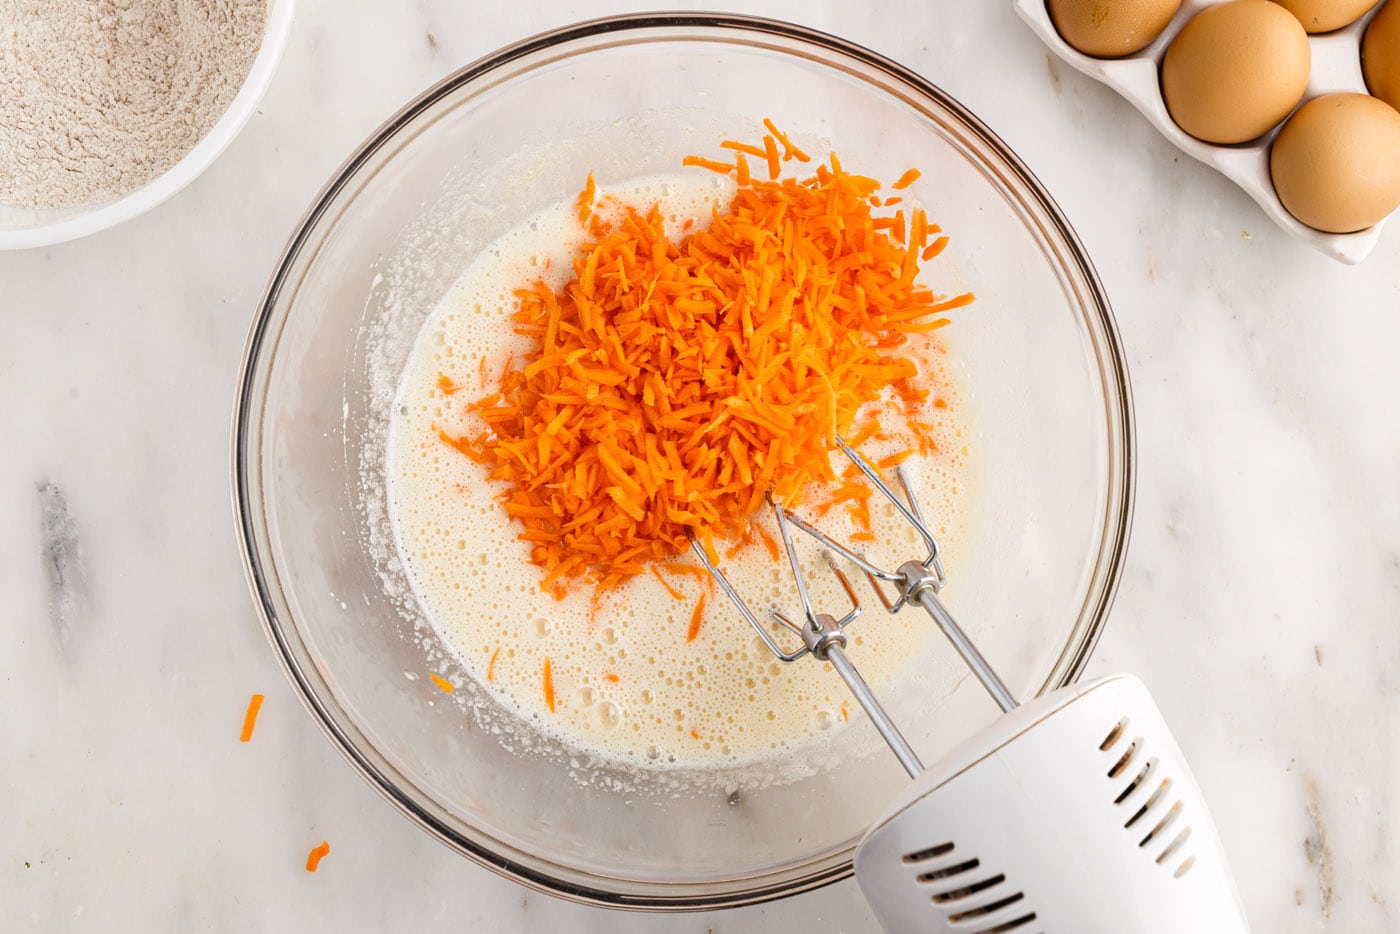 grated carrots added to egg mixture in a bowl with a mixer